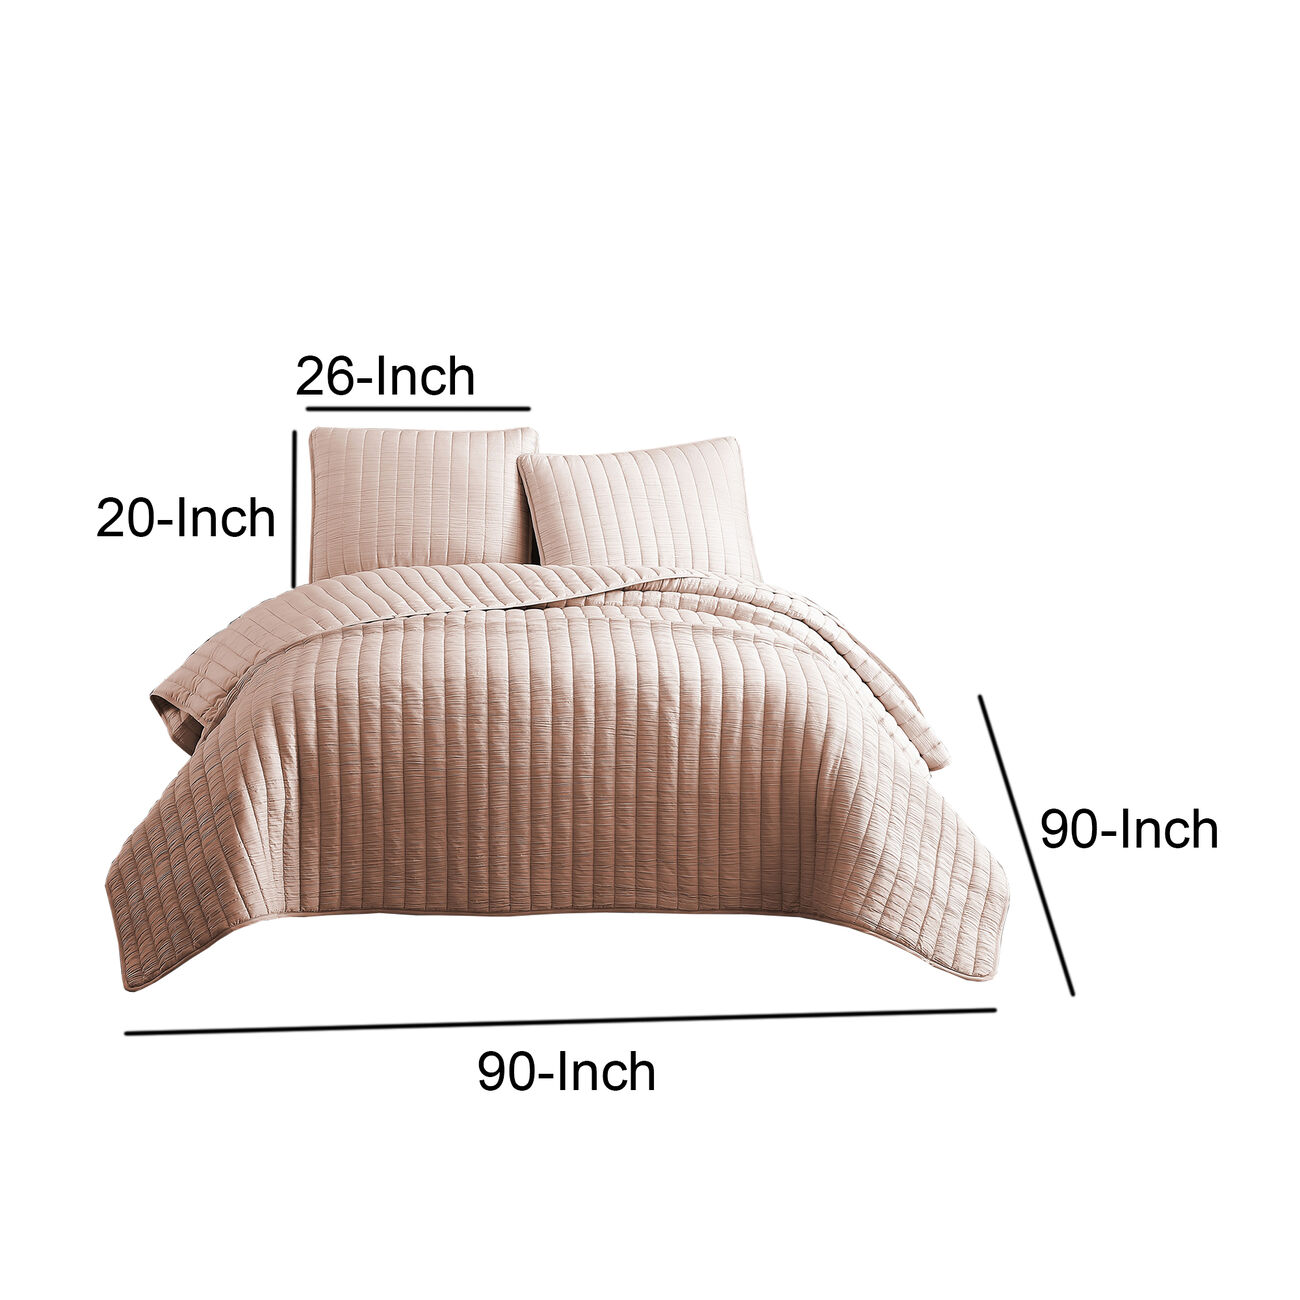 3 Piece Crinkles Queen Size Coverlet Set with Vertical Stitching, Pink